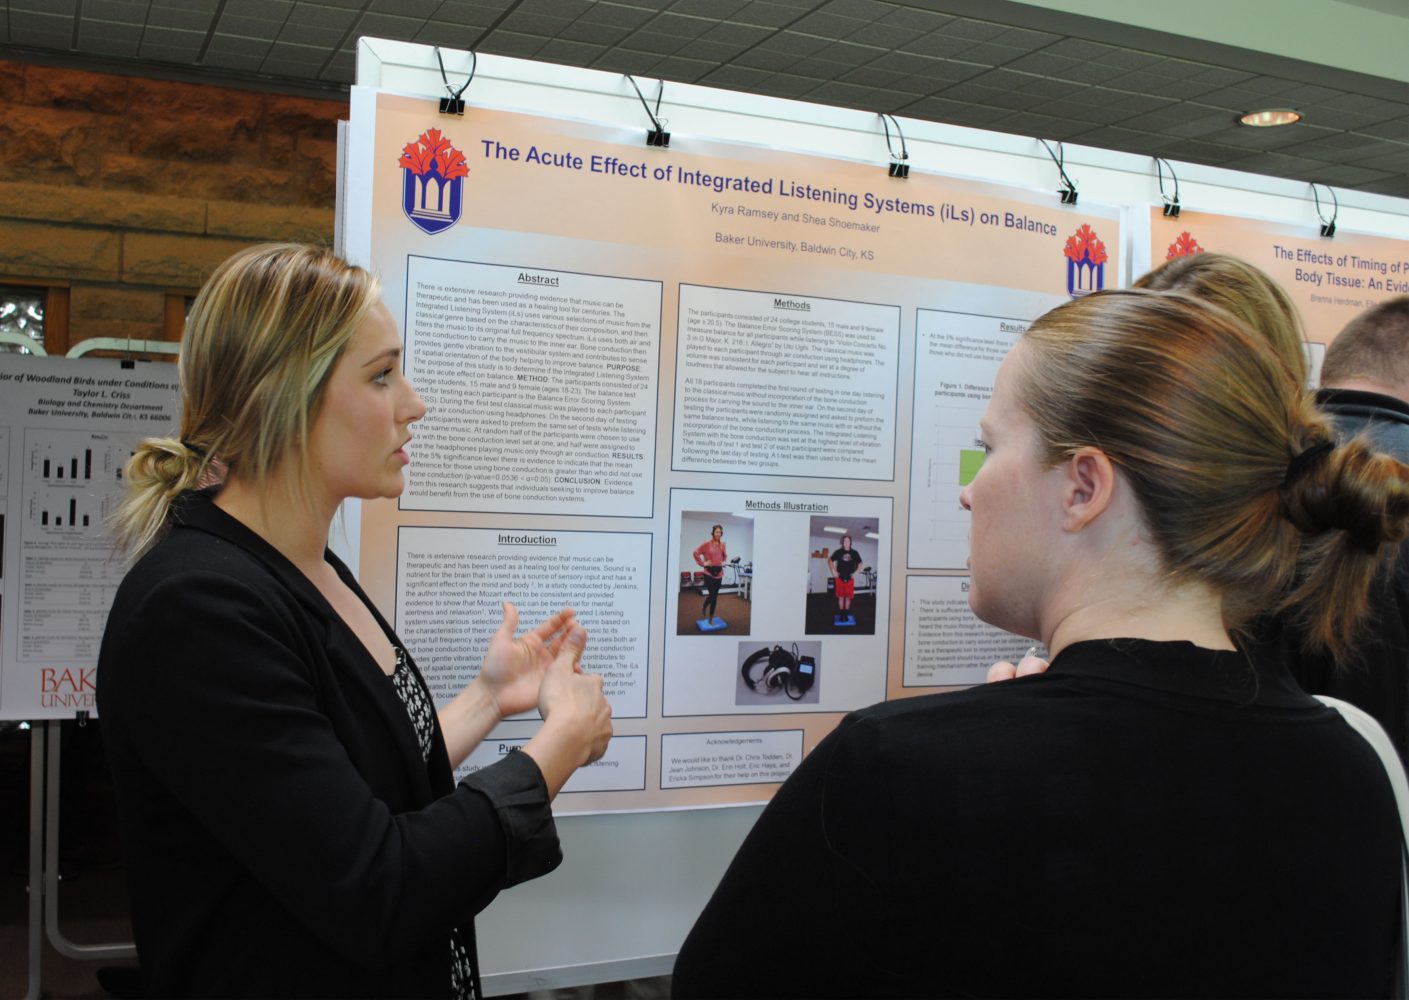 Senior exercise science major Kyra Ramsey makes a presentation to Associate Professor of Psychology Sara Crump on her partnered research on integrated listening programs and the effects they have on balance for individuals. The presentation was part of the Dialogos Scholars Symposium April 22, 2015. Image by Cassie Long.